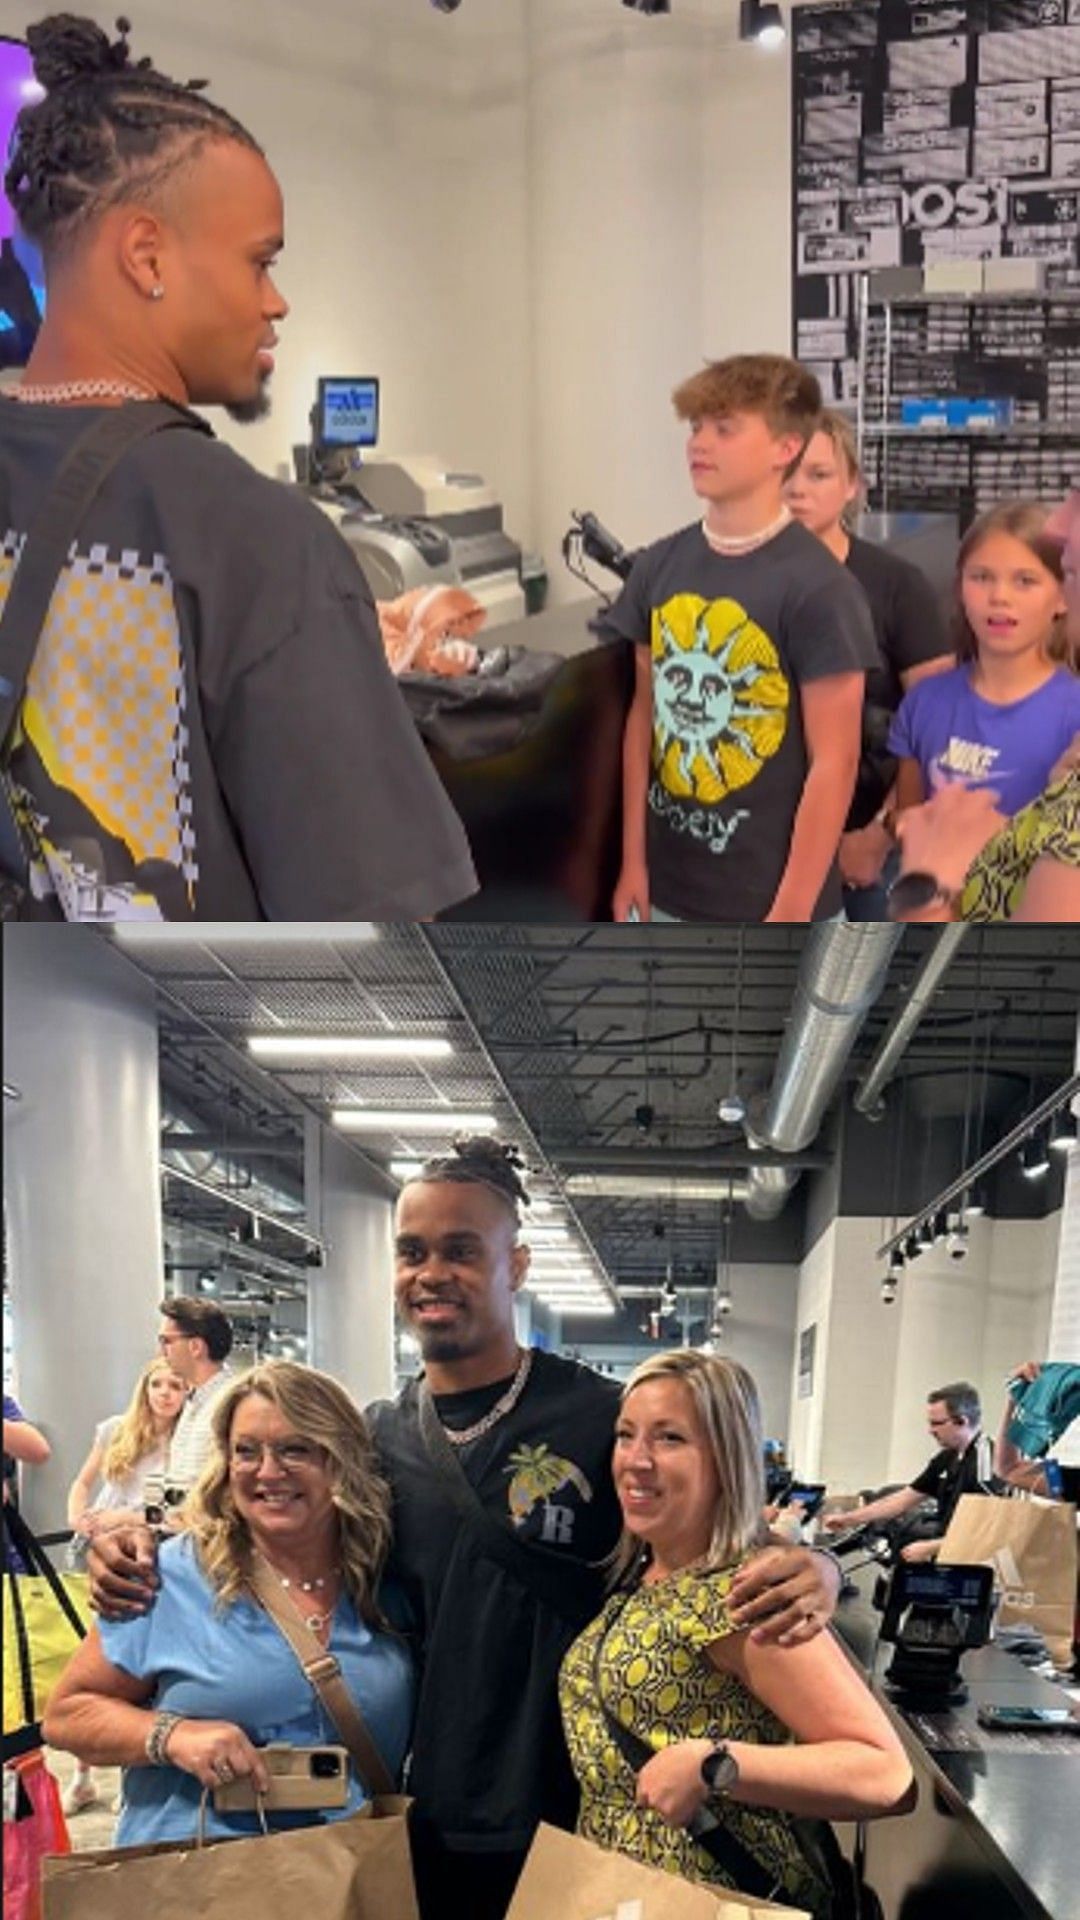 A photo shared on Instagram that shows Dallas Cowboys wide receiver Jalen Tolbert at an Adidas store.(IG: Andrew Gleason)